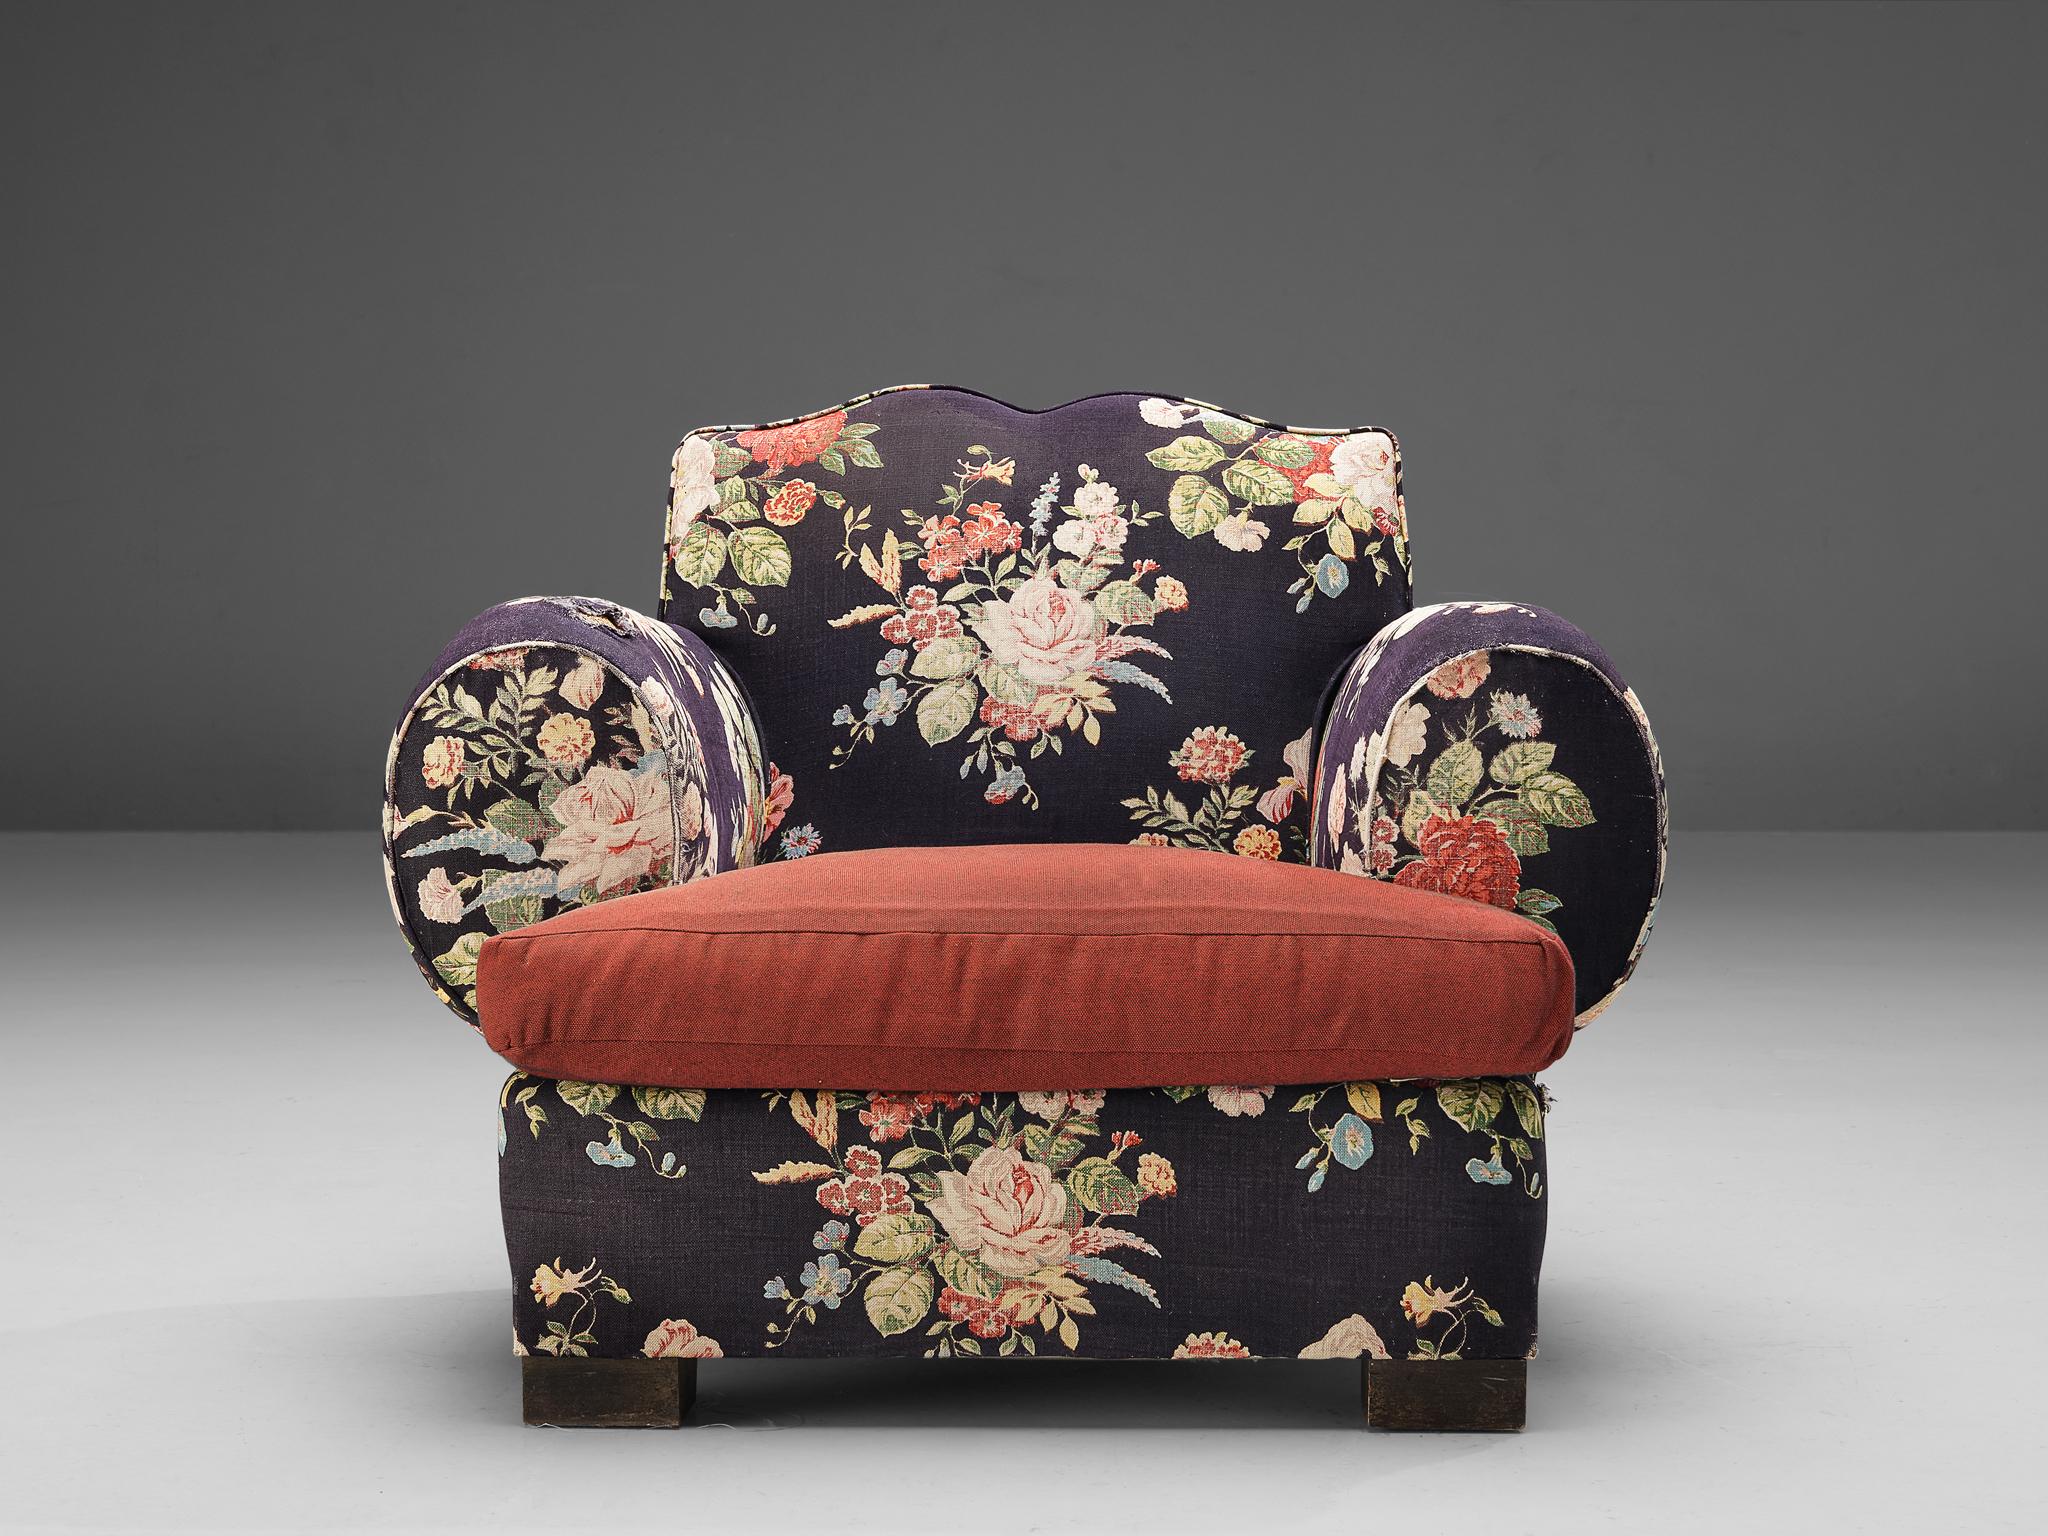 French Art Deco Pair of Lounge Chairs in Floral Upholstery  For Sale 3